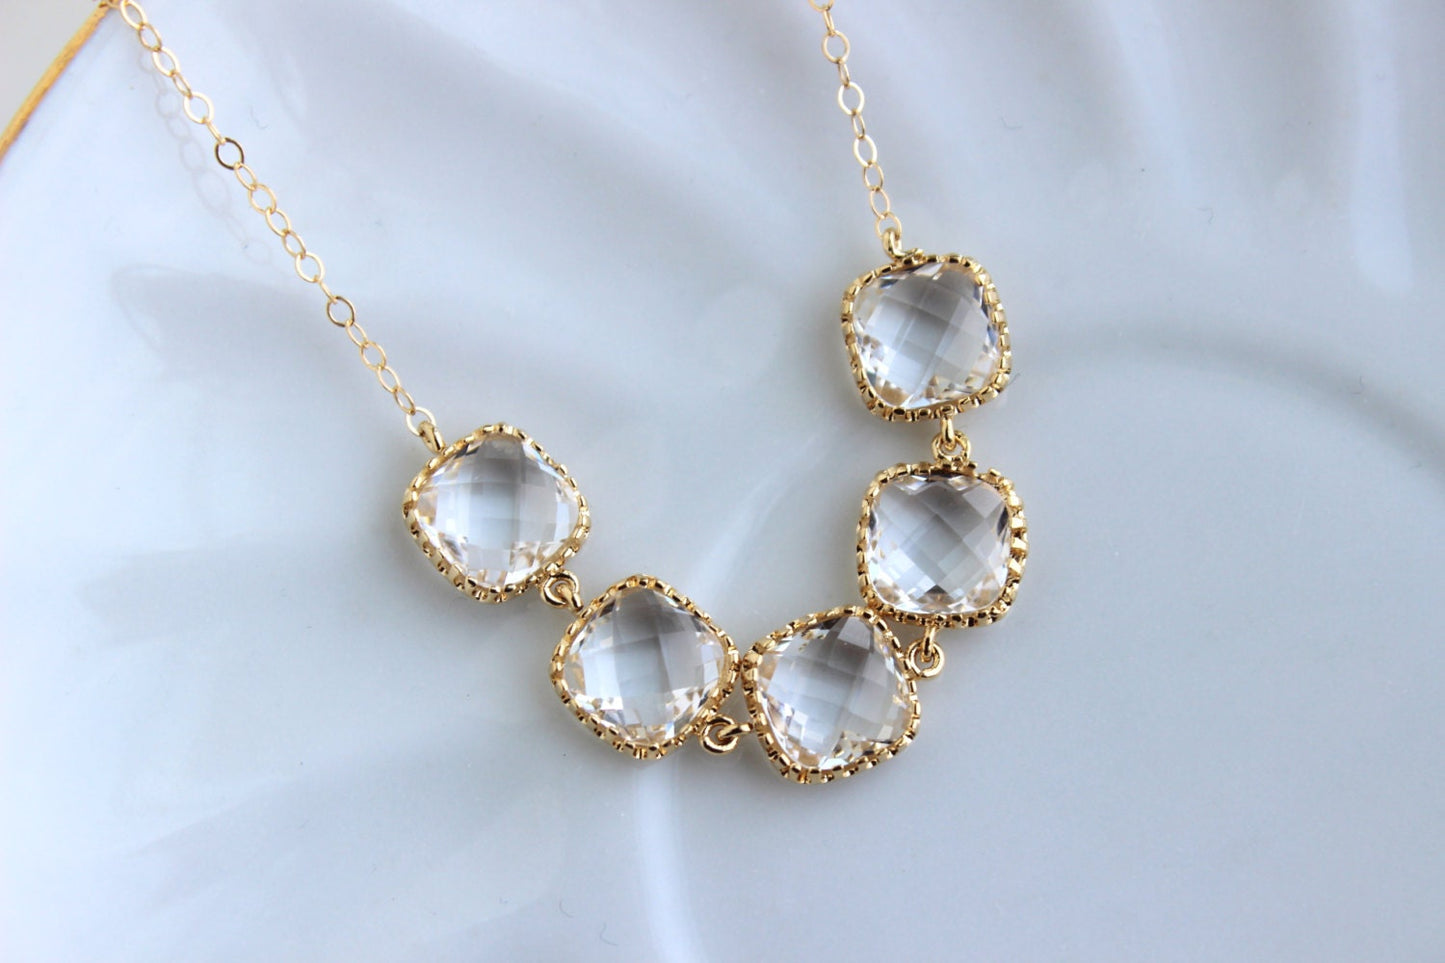 Gold Crystal Necklace Clear Jewelry Square Statement Necklace - Bridesmaid Gift - Crystal Bridal Jewelry Wedding Jewelry Bridesmaid Jewelry